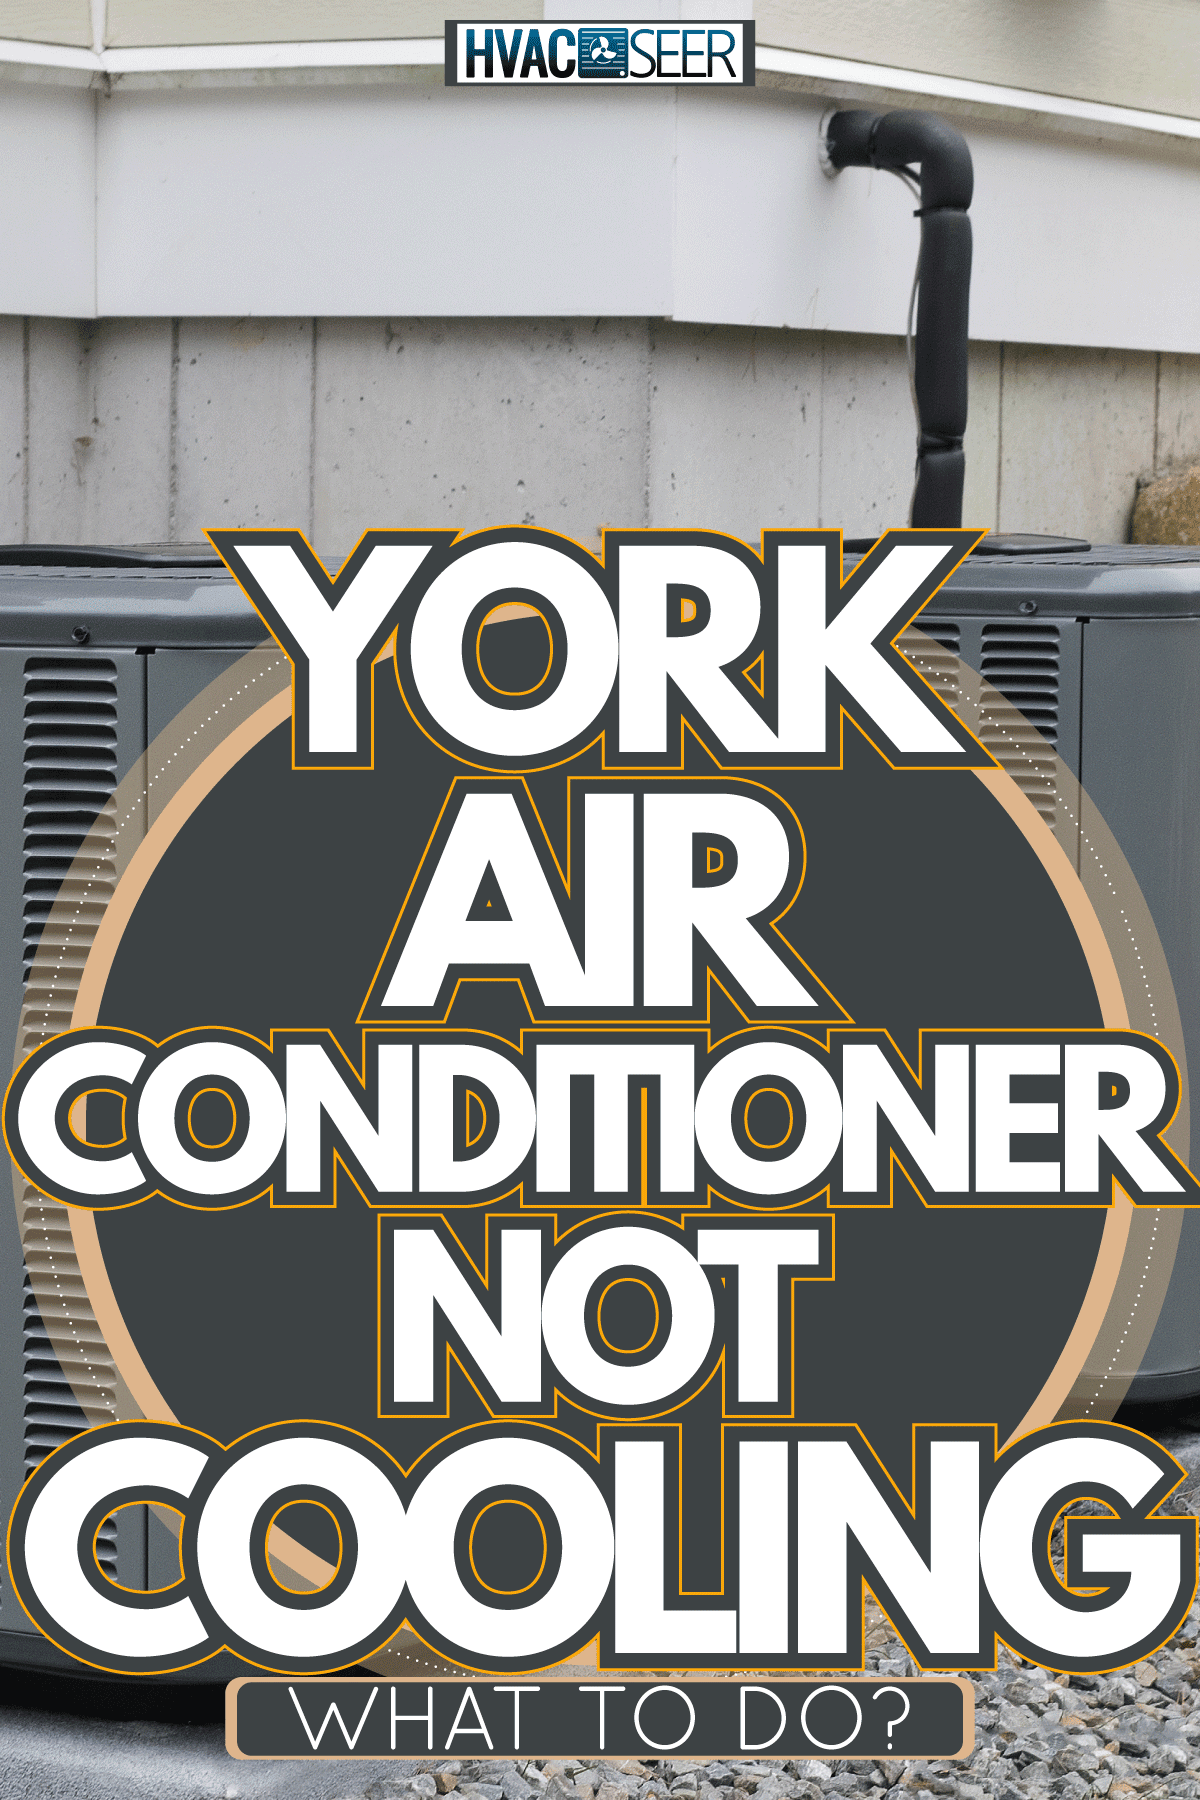 Air condtioner regular checking can be a good routine for your ac to make it long last, York Air Conditioner Not Cooling - What to Do?